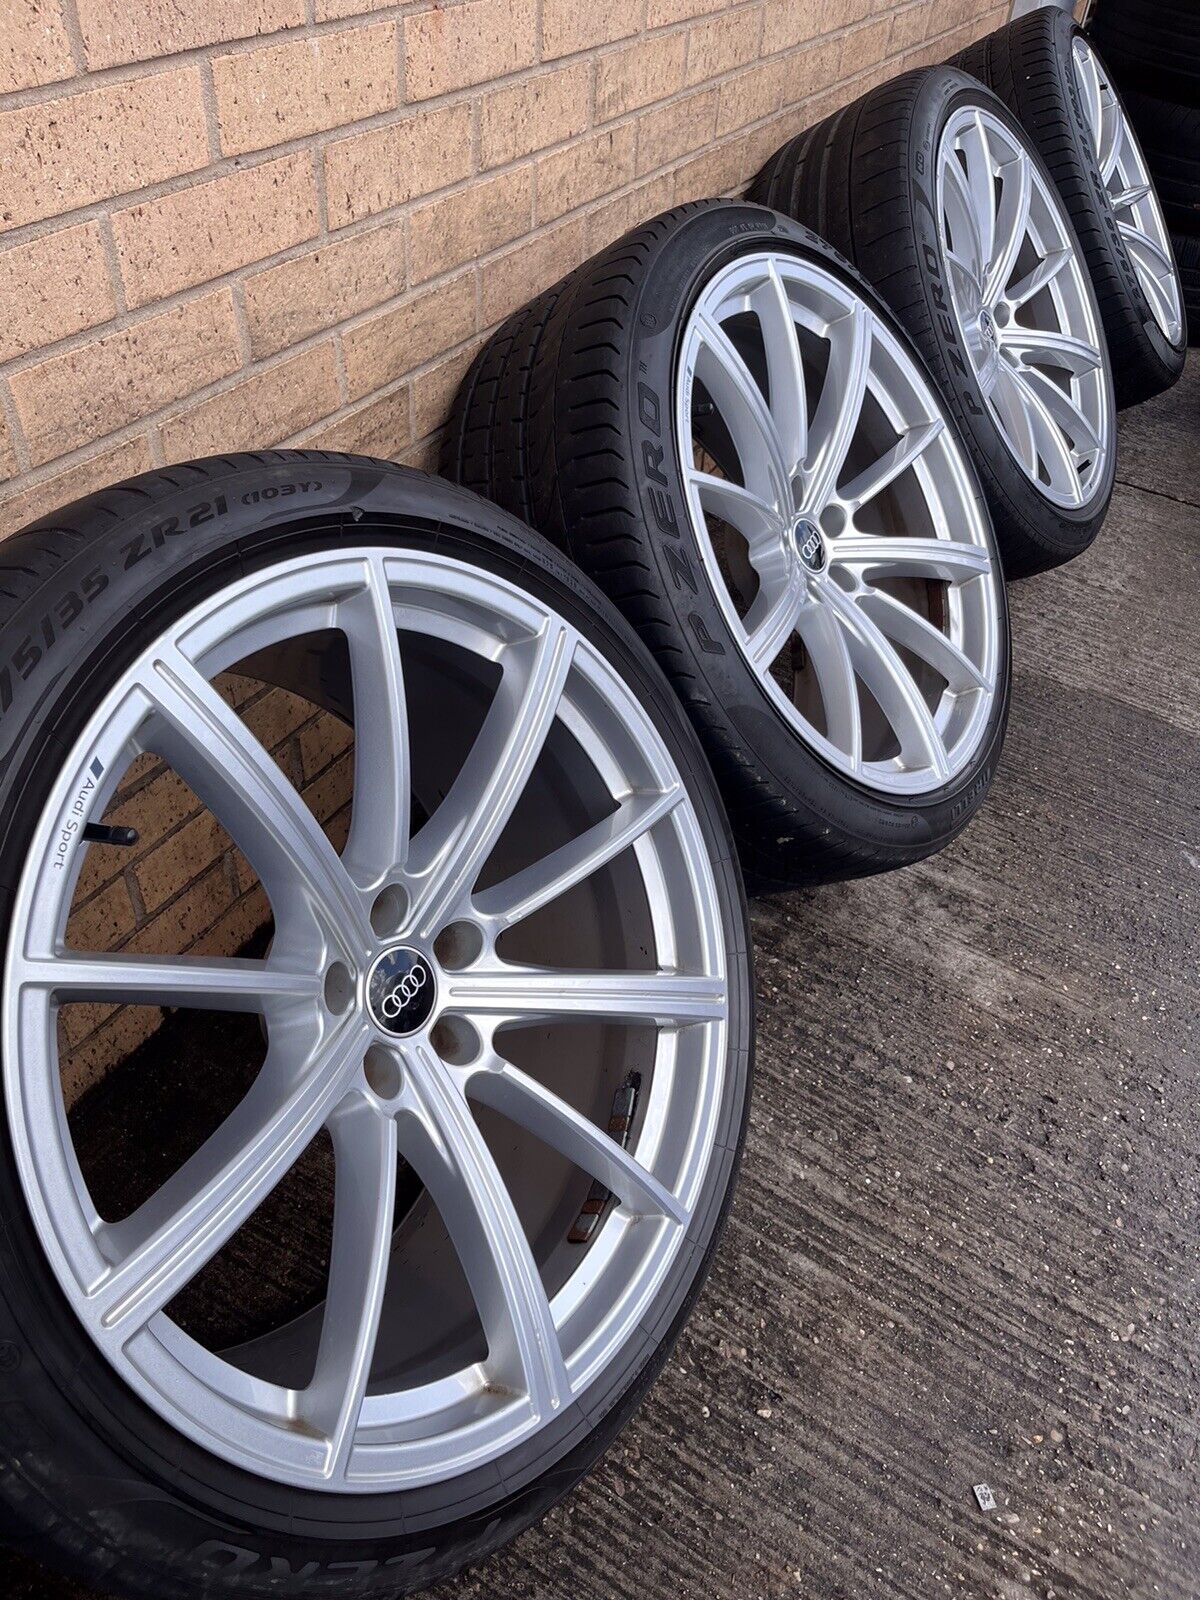 Set Of 21” Genuine Audi Wheels And Pirelli Tyres 5x112 Fits A4 A5 Q3 A6 A7